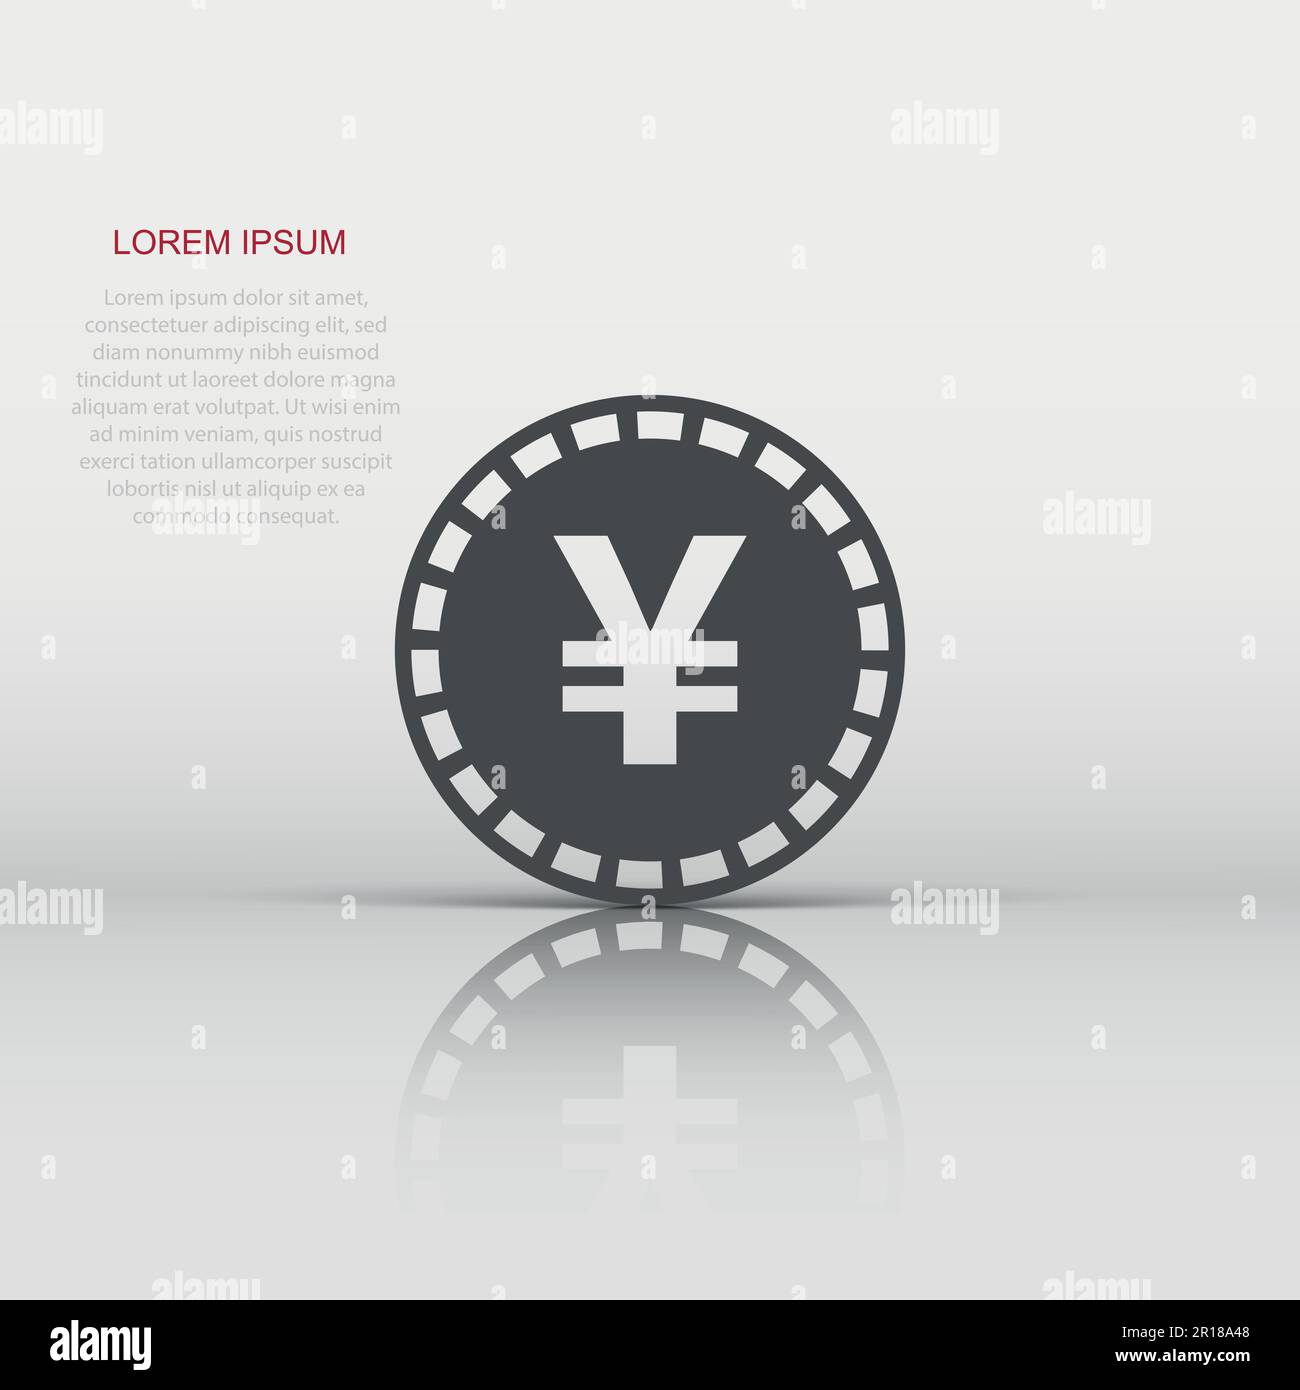 Yen, yuan money currency vector icon in flat style. Yen coin symbol illustration on white isolated background. Asia money business concept. Stock Vector